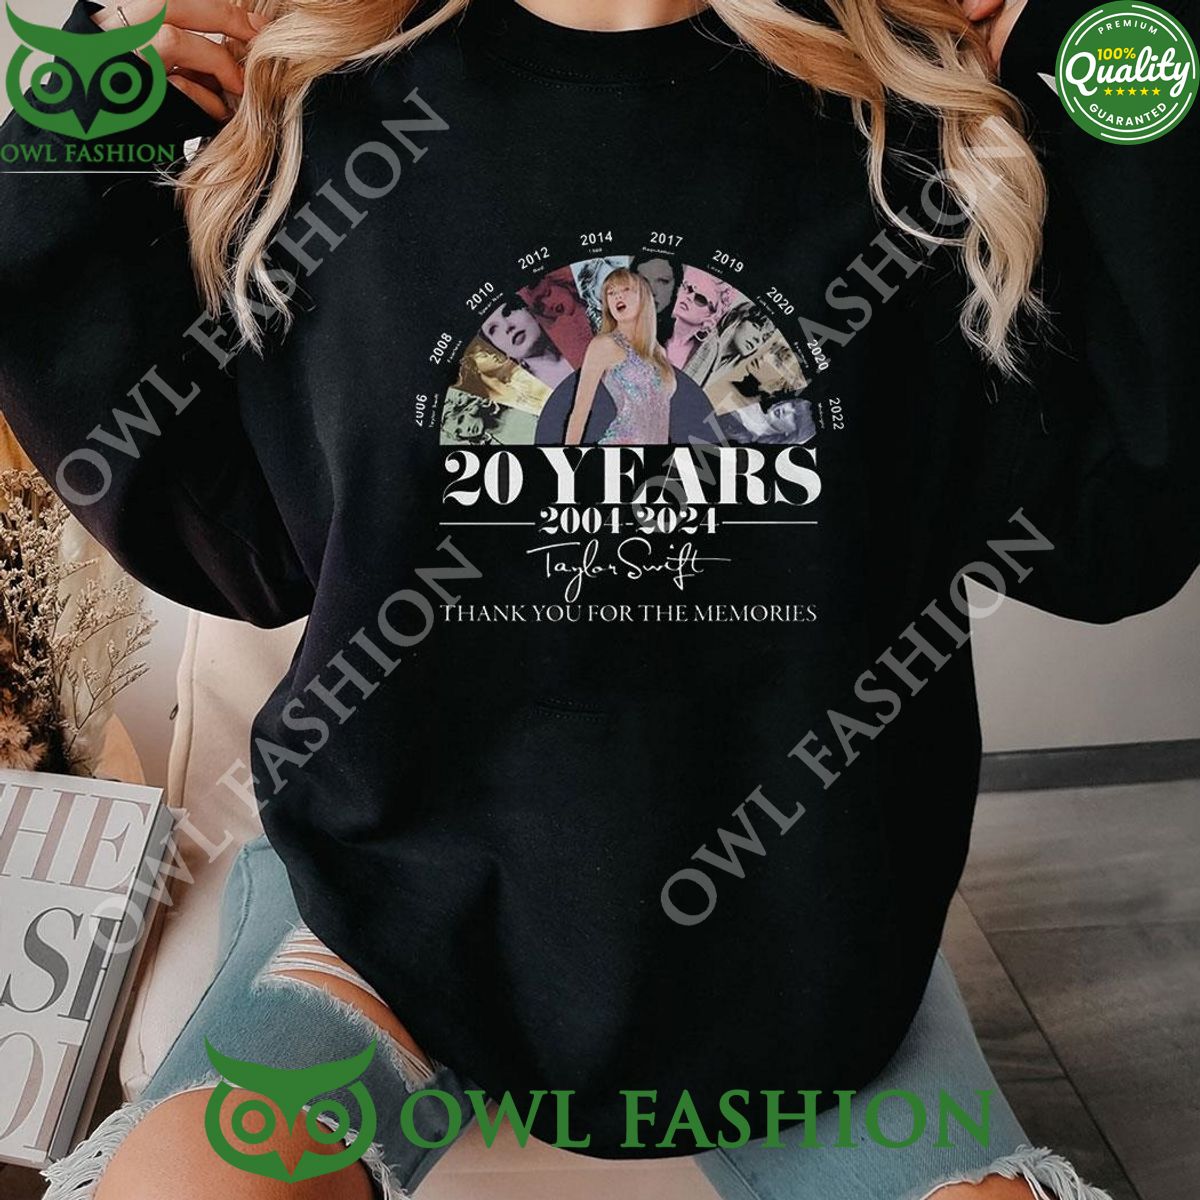 taylor thank you for the memories 20 year 2004 2024 shirt hoodie 1 XSCIV.jpg